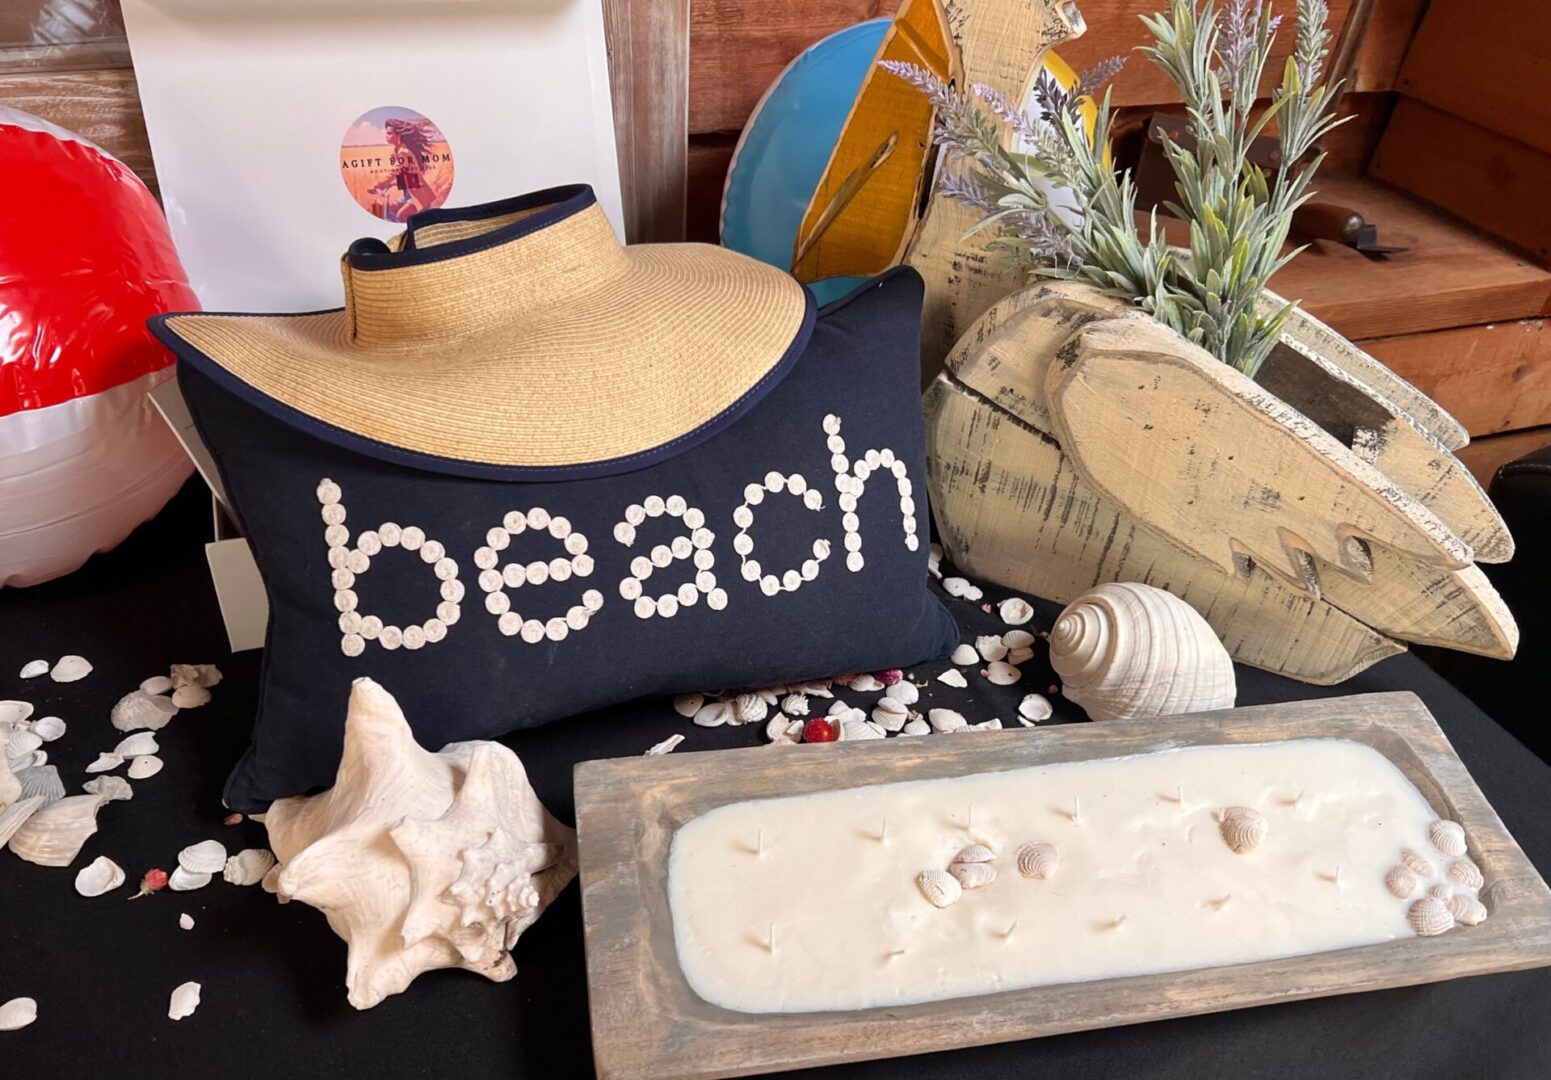 12 wick dough bowl candle with seashells in it, a fun pack and go hat, and medium neck pillow